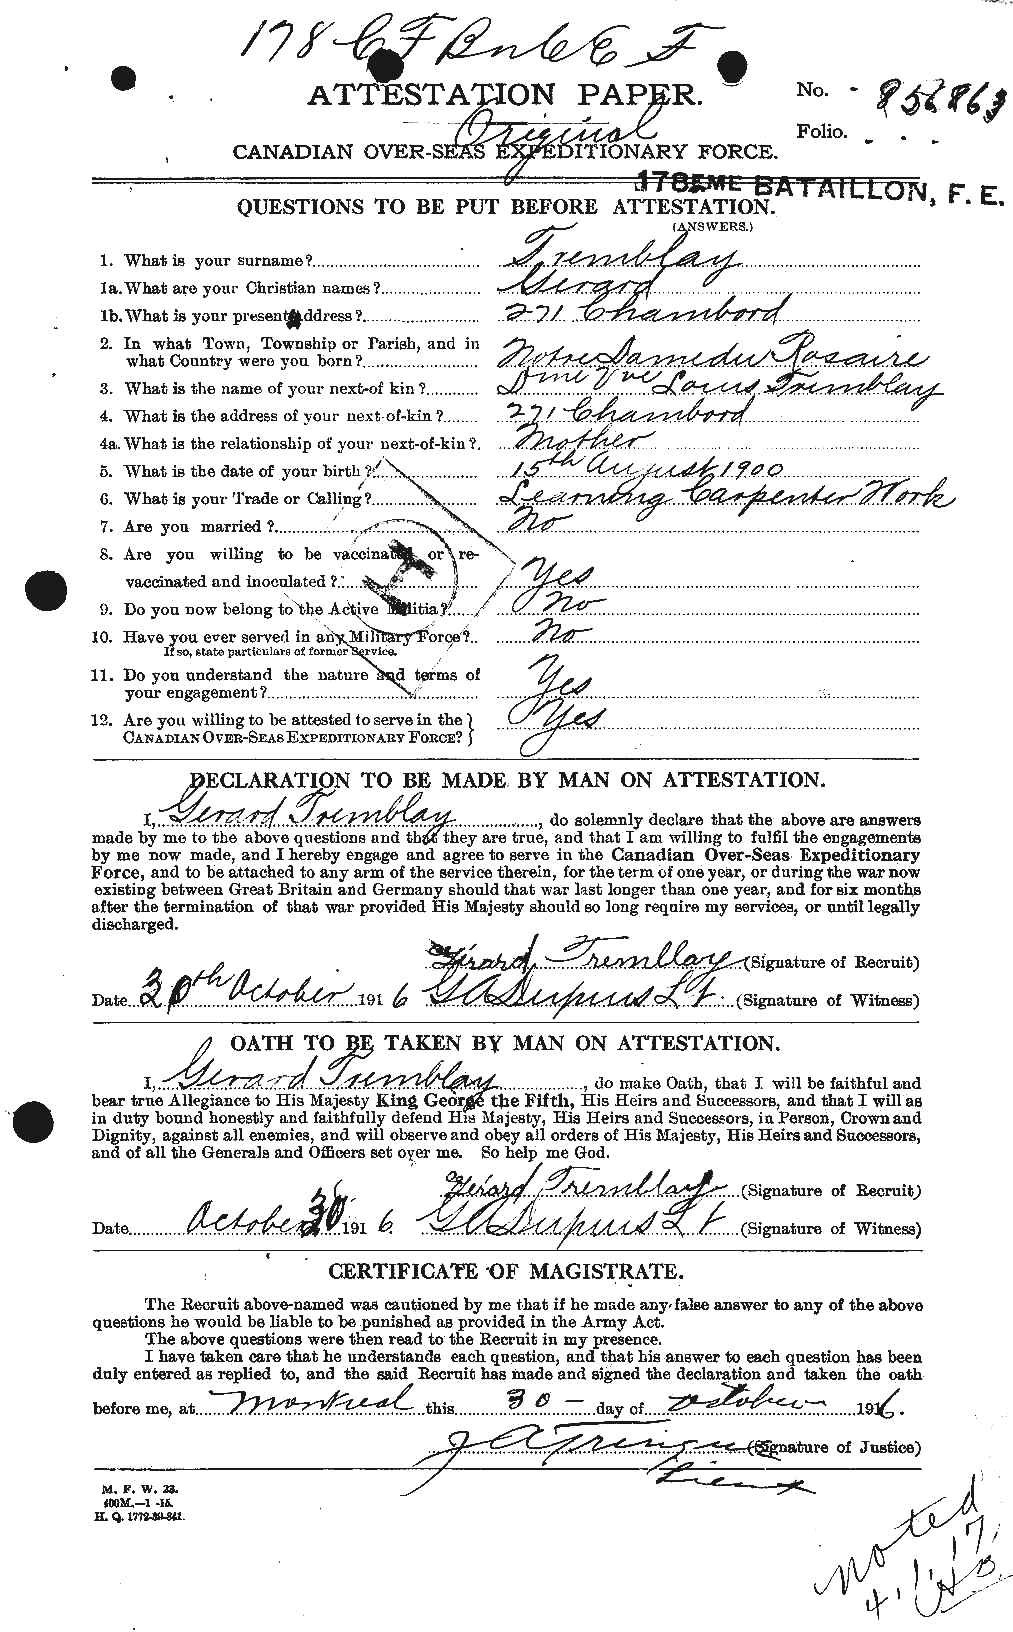 Personnel Records of the First World War - CEF 639071a